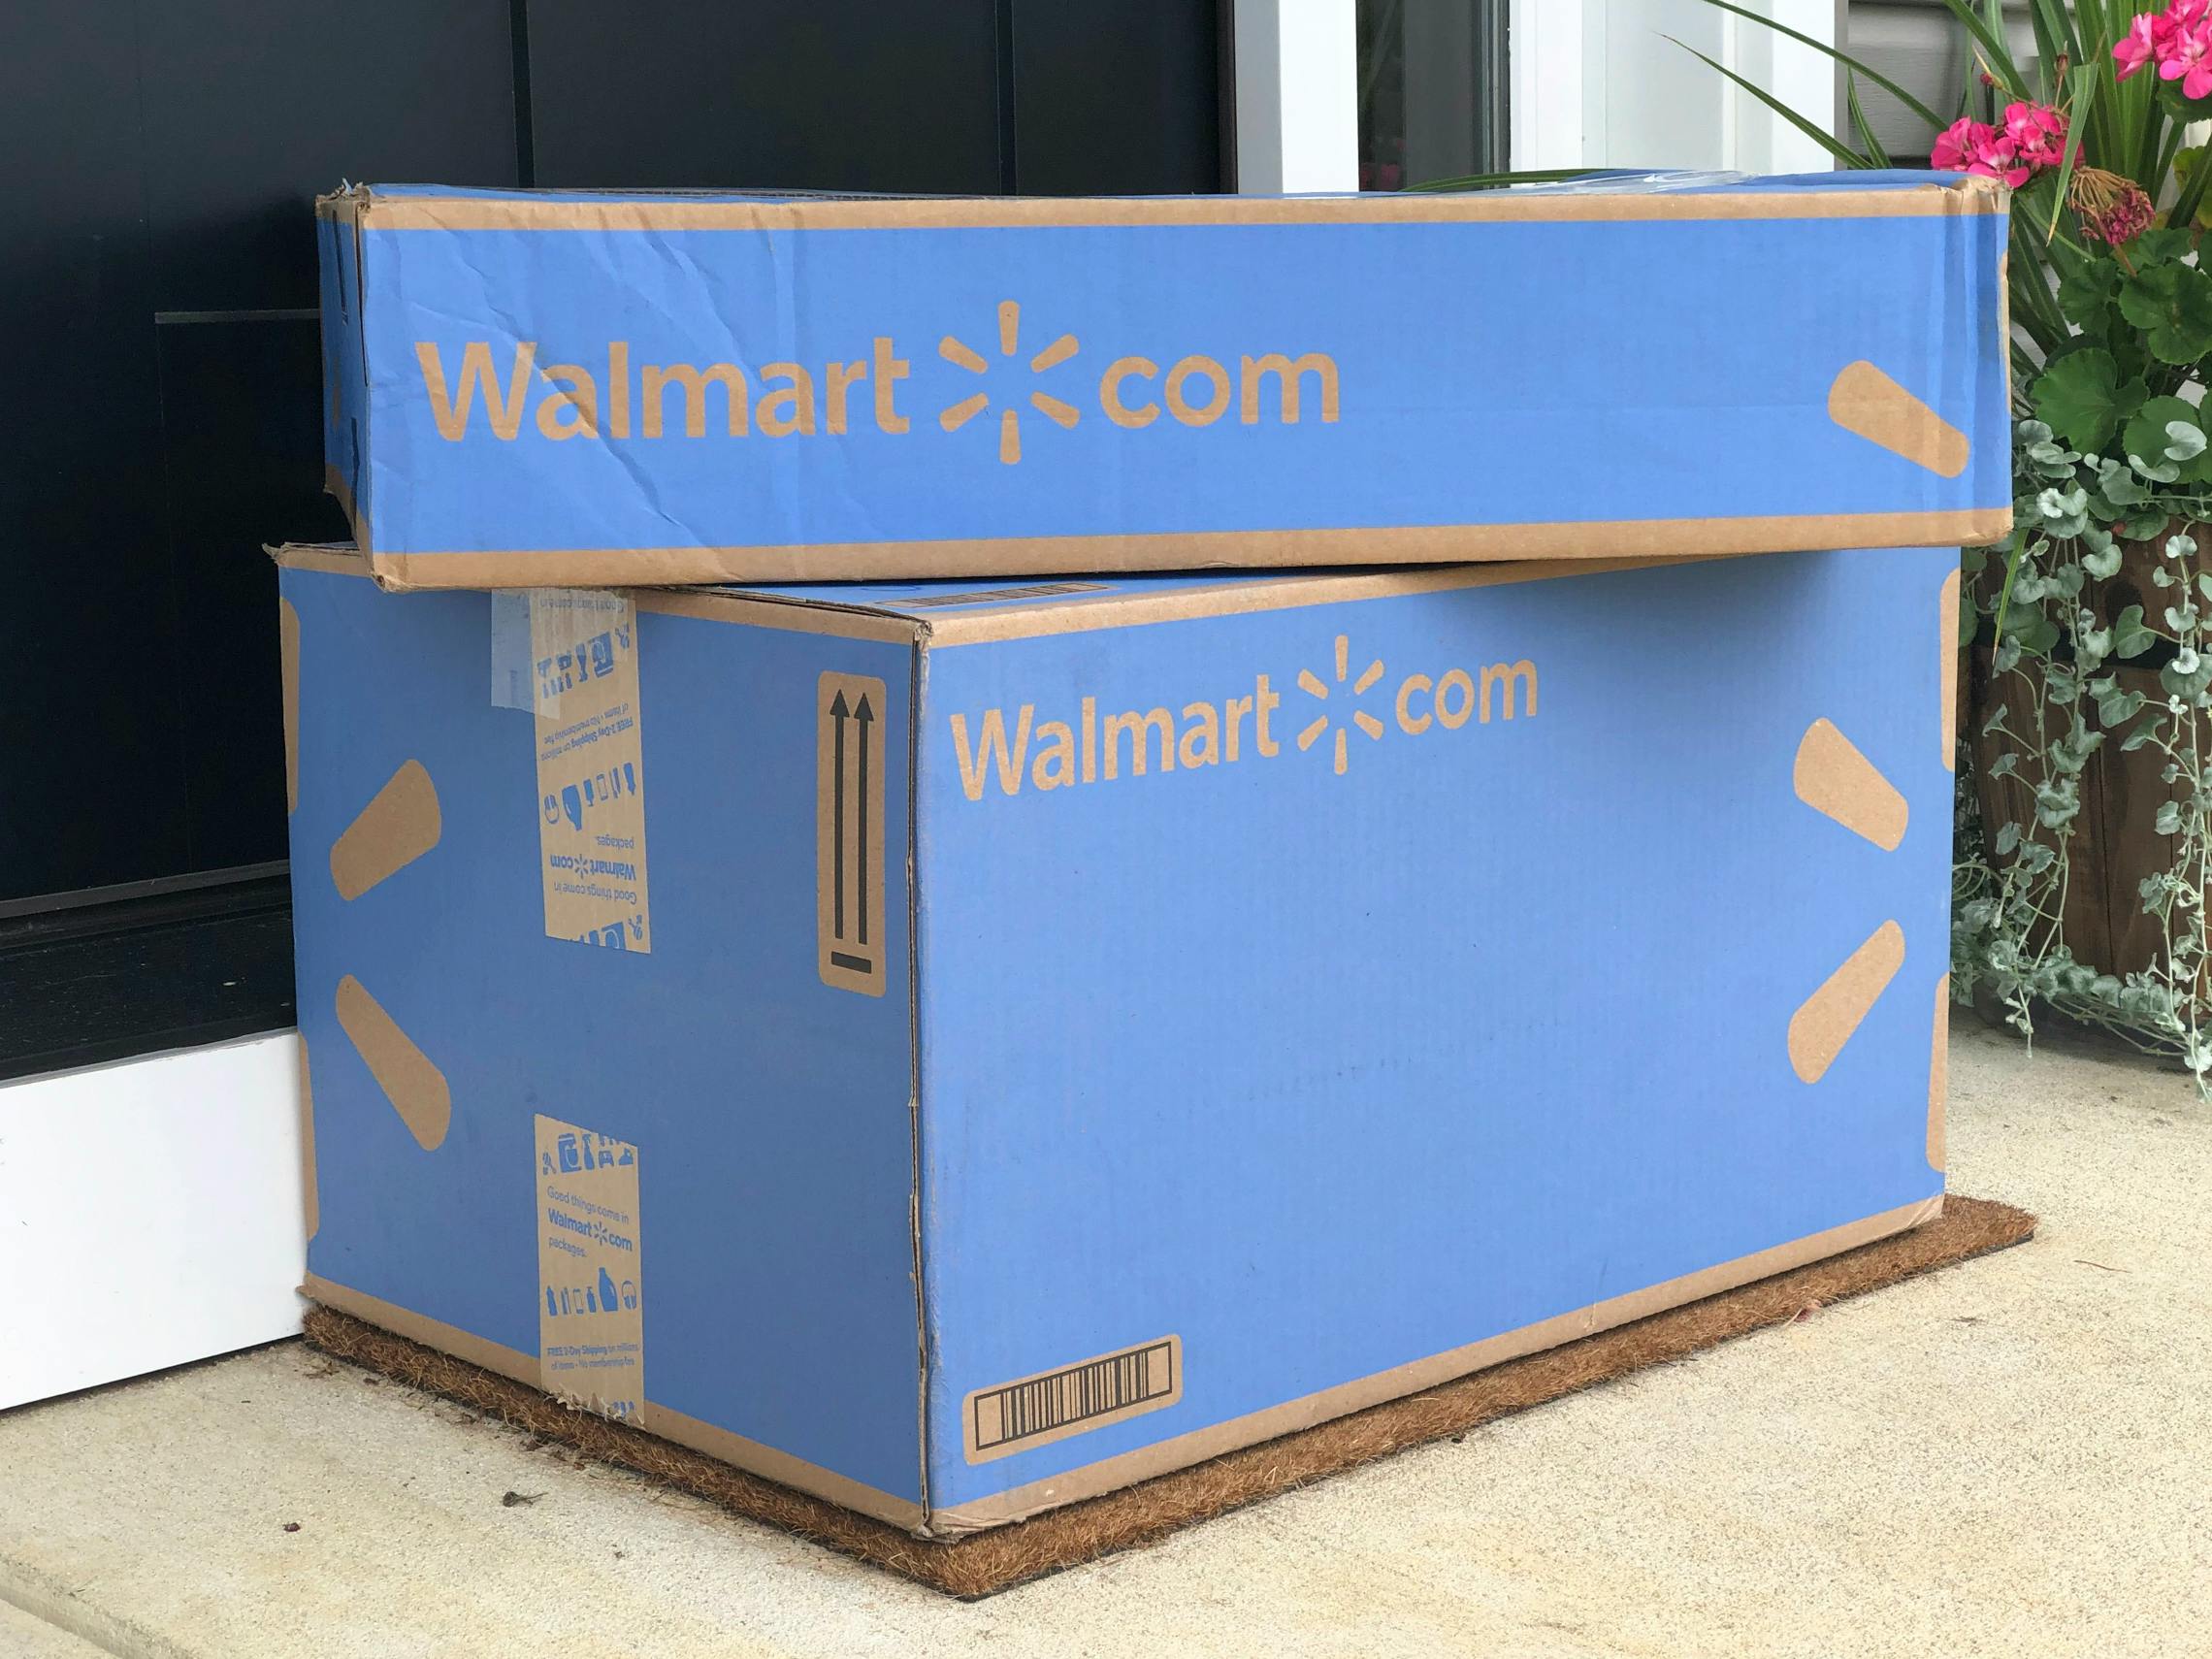 Two Walmart boxes stacked on a front doorstep.